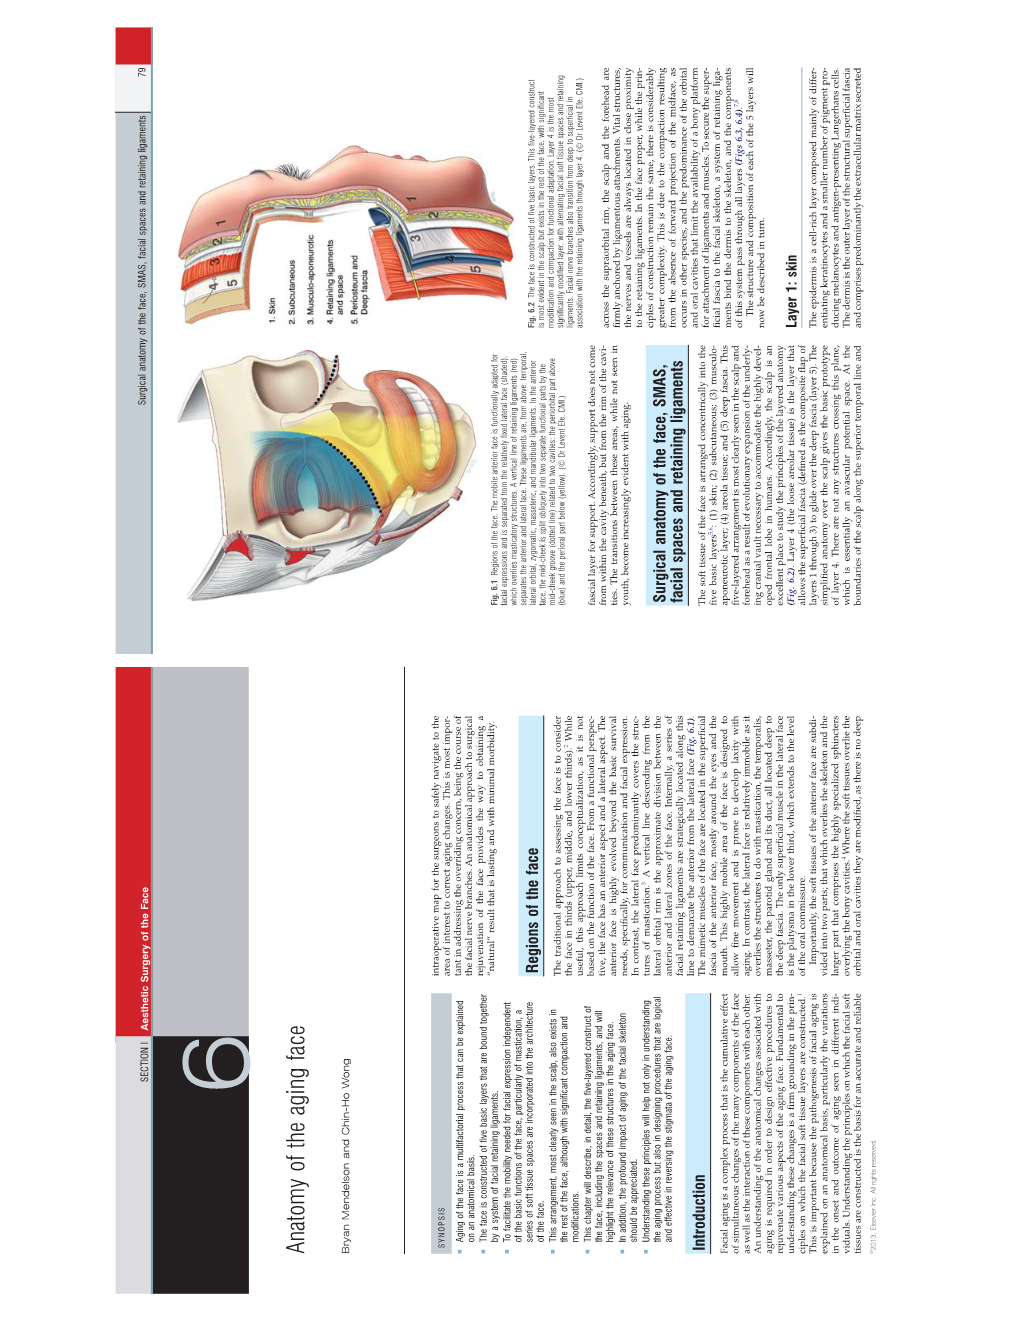 Aesthetic Surgery of the Face Surgical Anatomy of the Face, SMAS, Facial Spaces and Retaining Ligaments 79